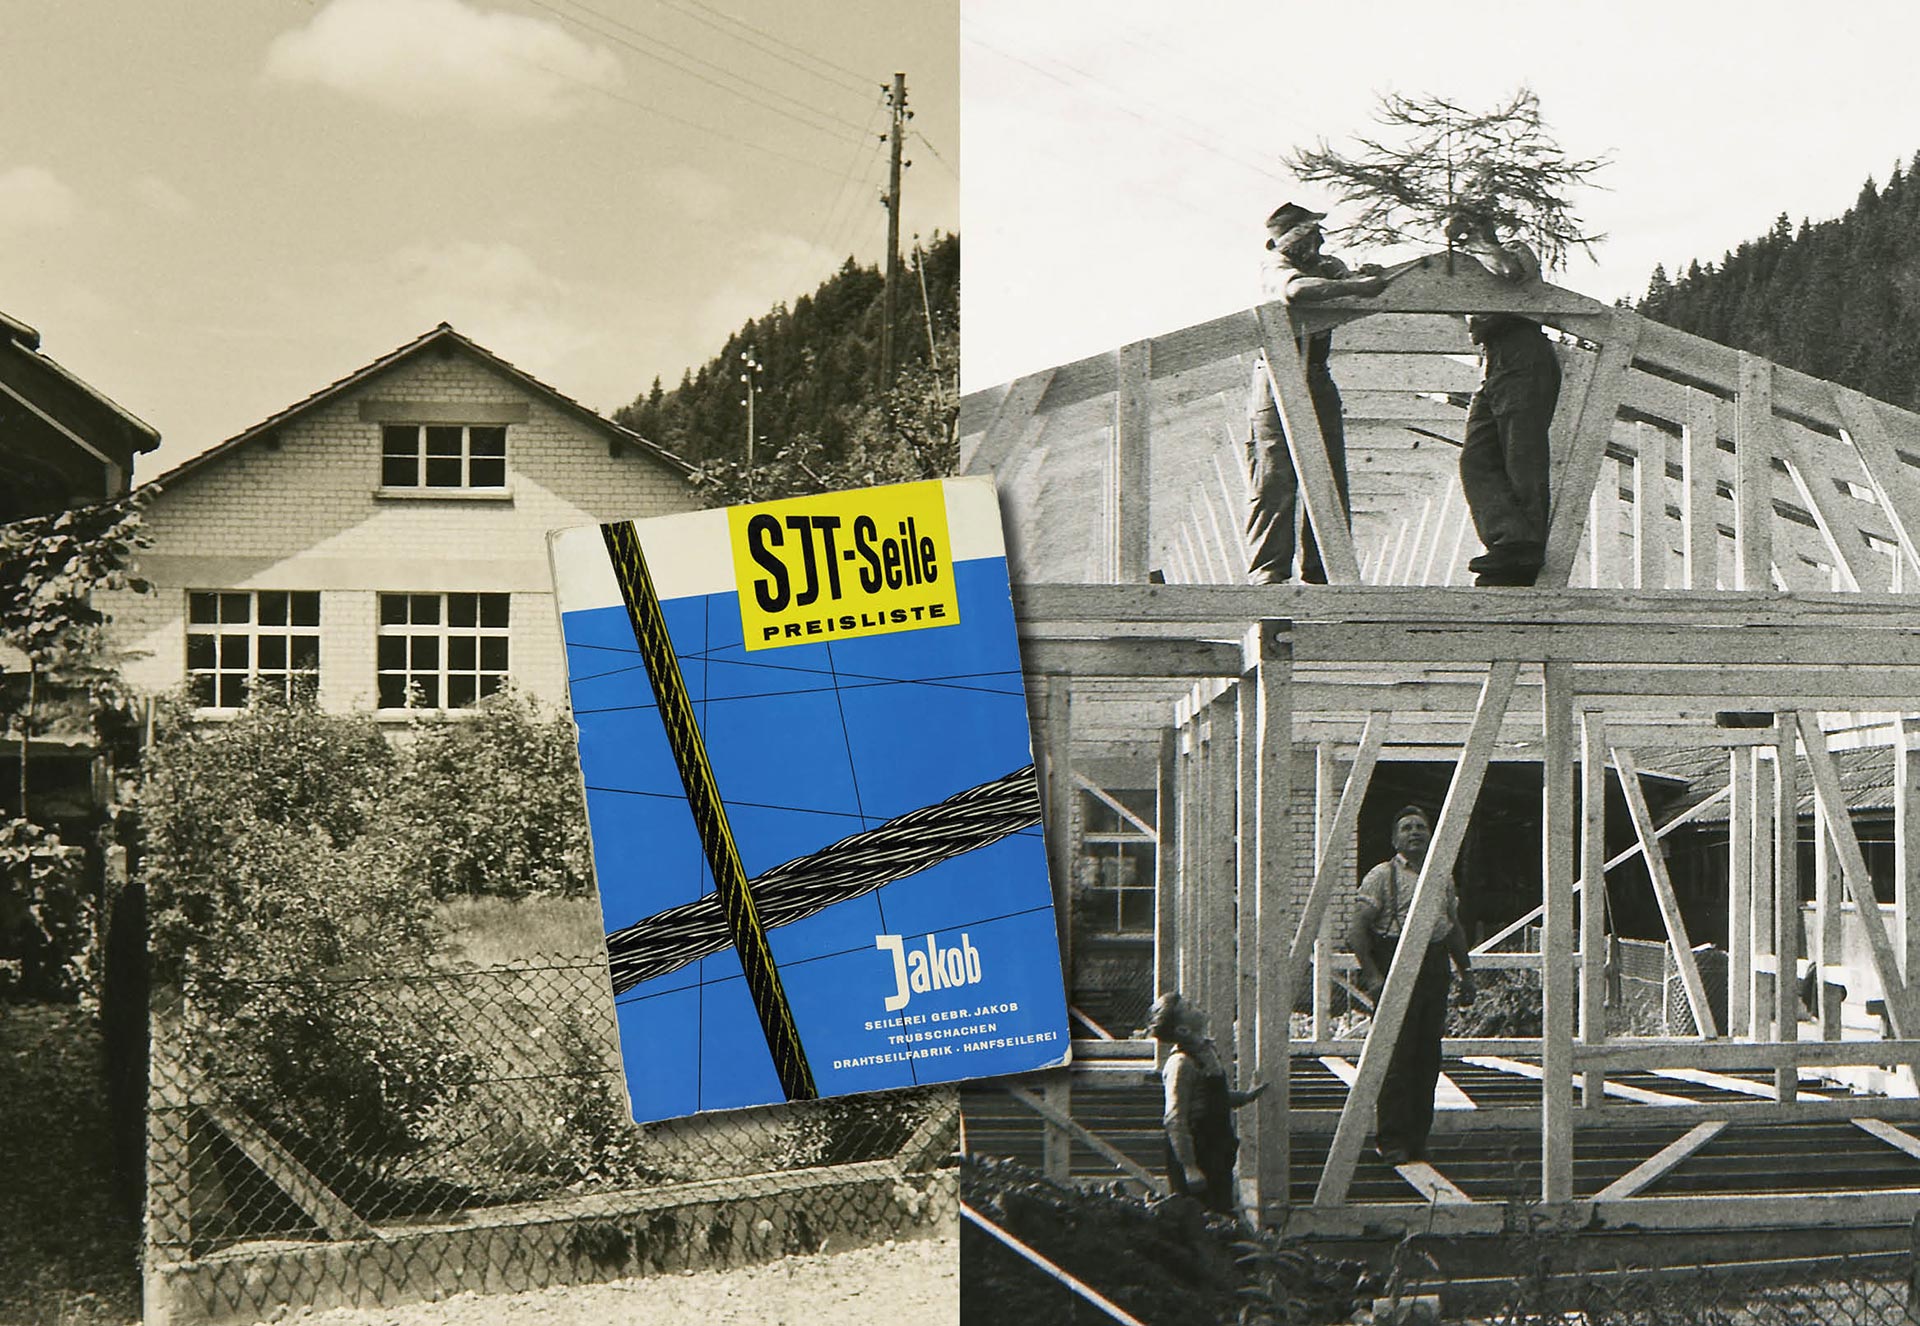 Images of the new office building, the topping-out ceremony and the cover of a price list from 1960